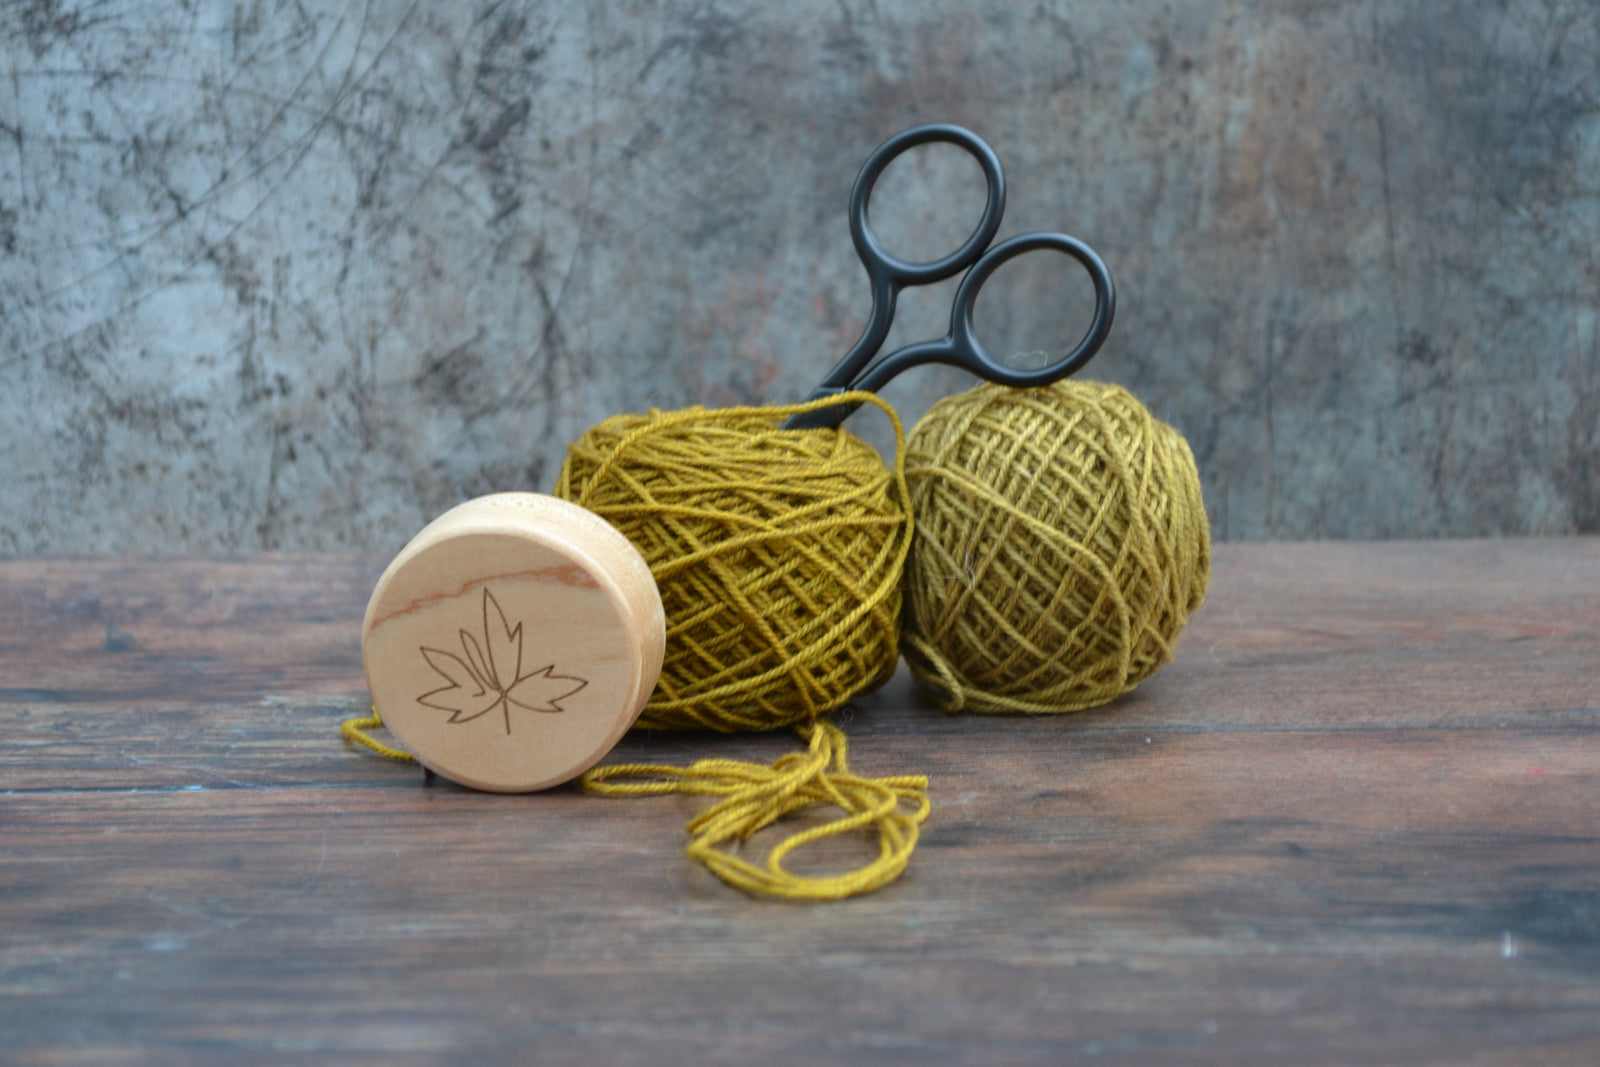 Thread and Maple - Maple Measuring Tape